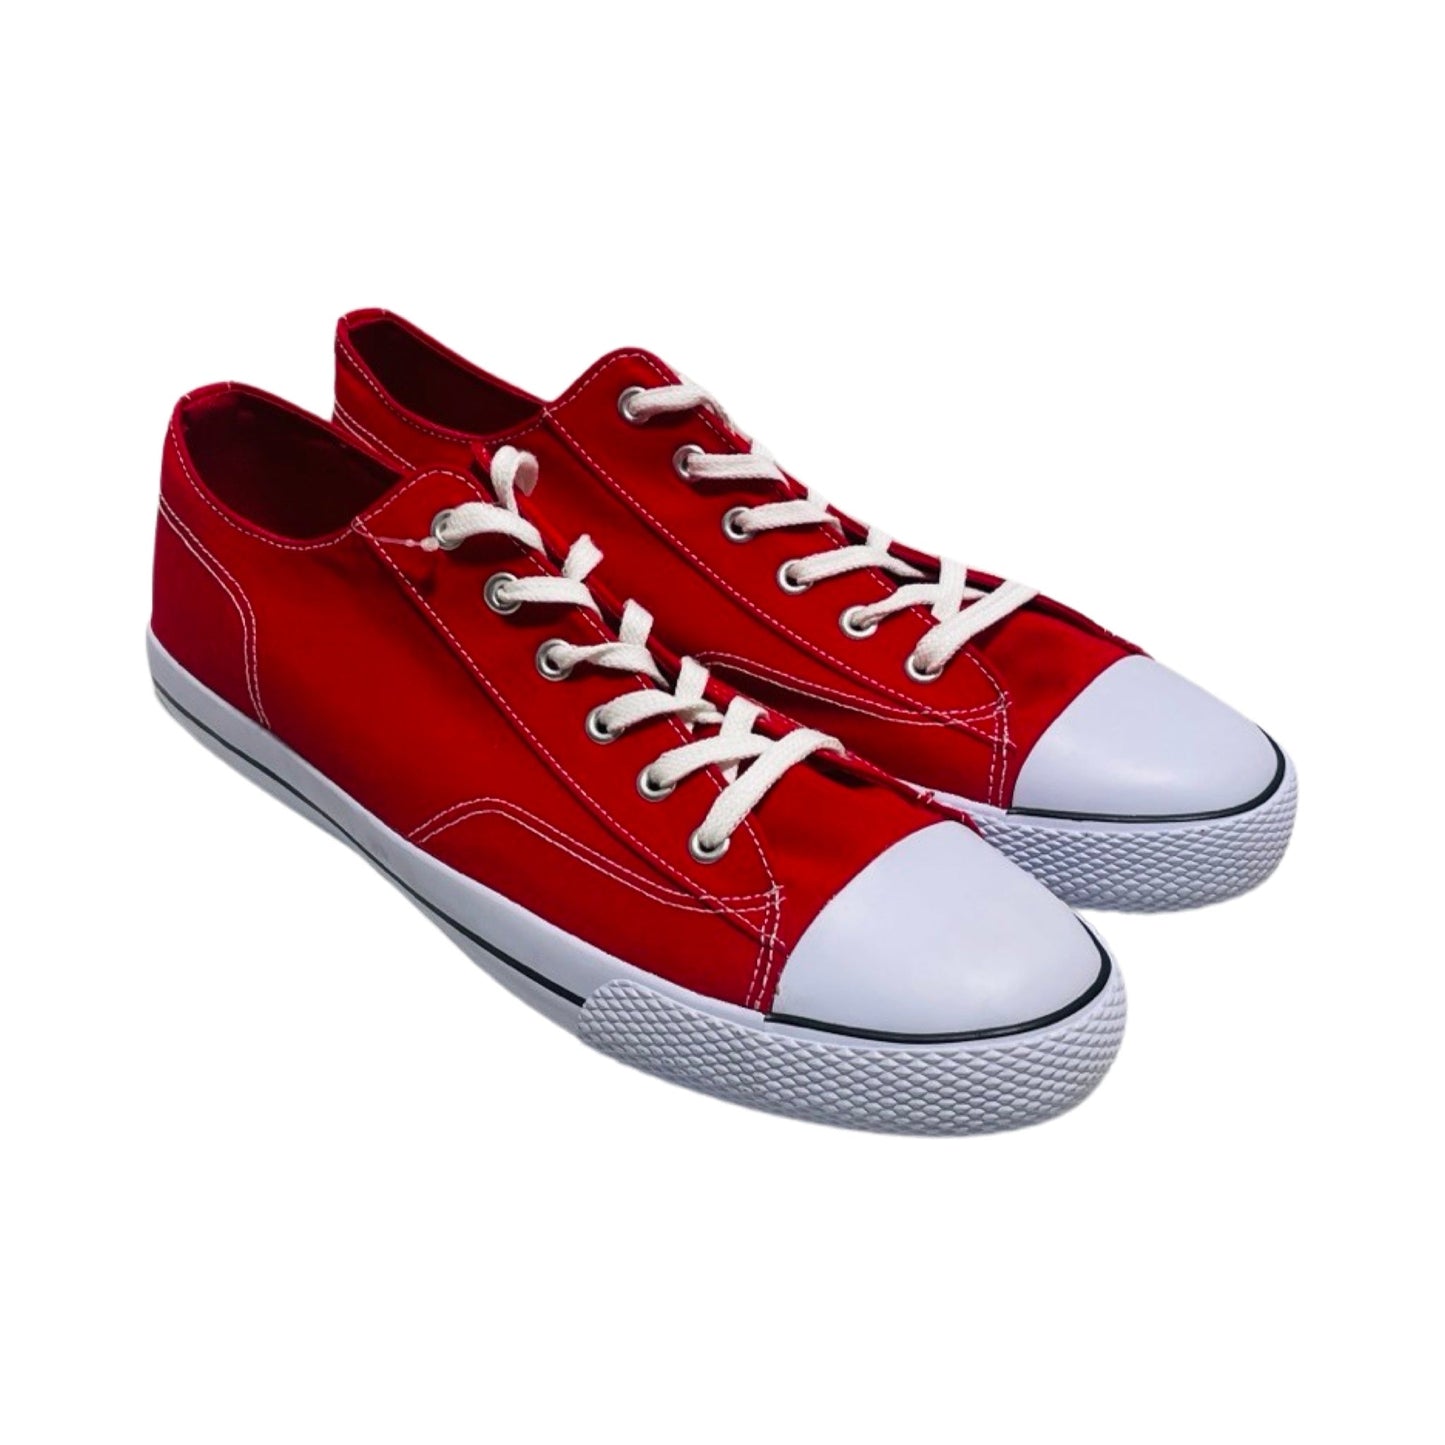 Red & White Shoes Sneakers By Airwalk Size: 15